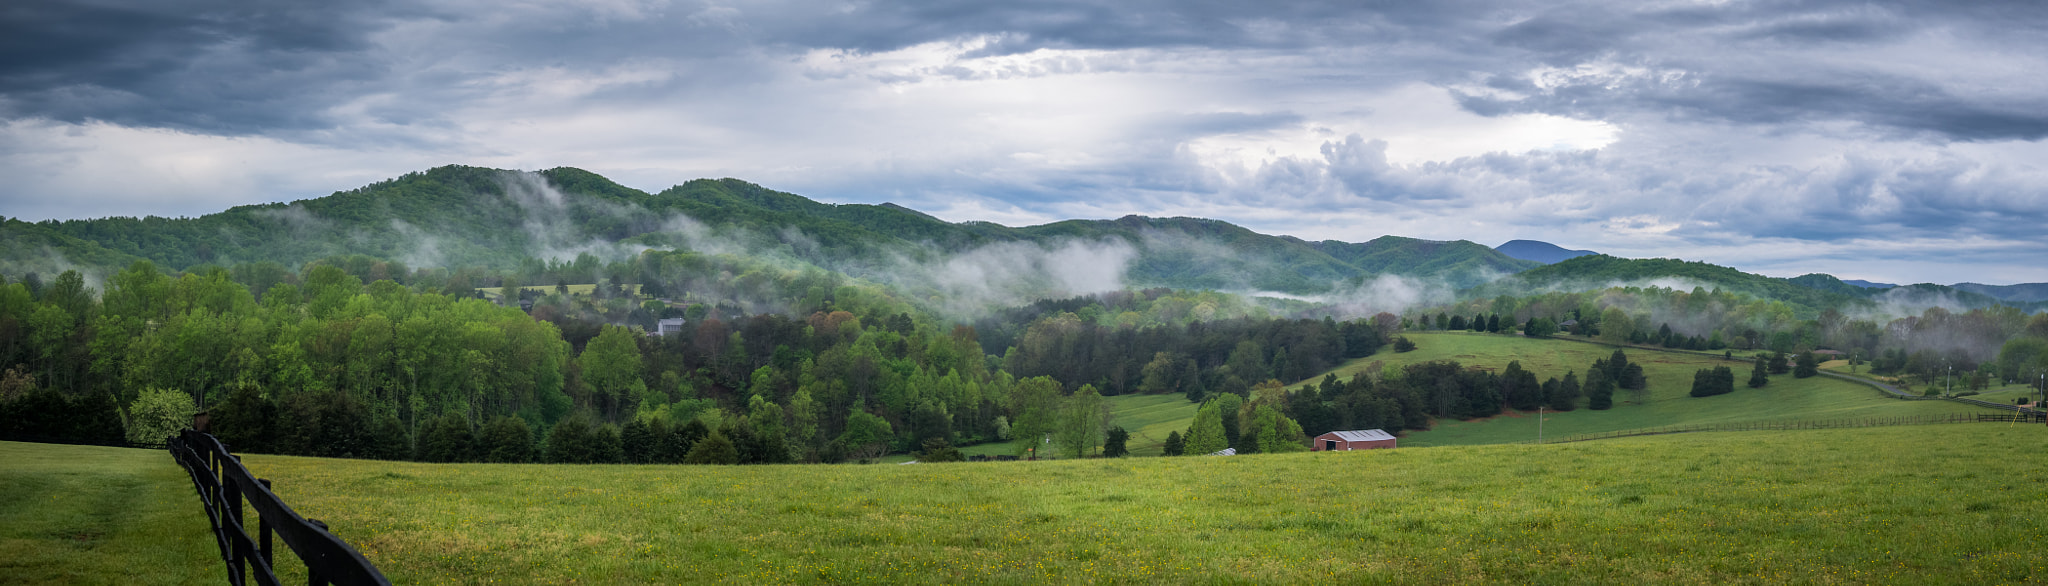 Panasonic Lumix DMC-GH2 + LUMIX G 20/F1.7 II sample photo. Rolling hills under rolling clouds in virginia photography